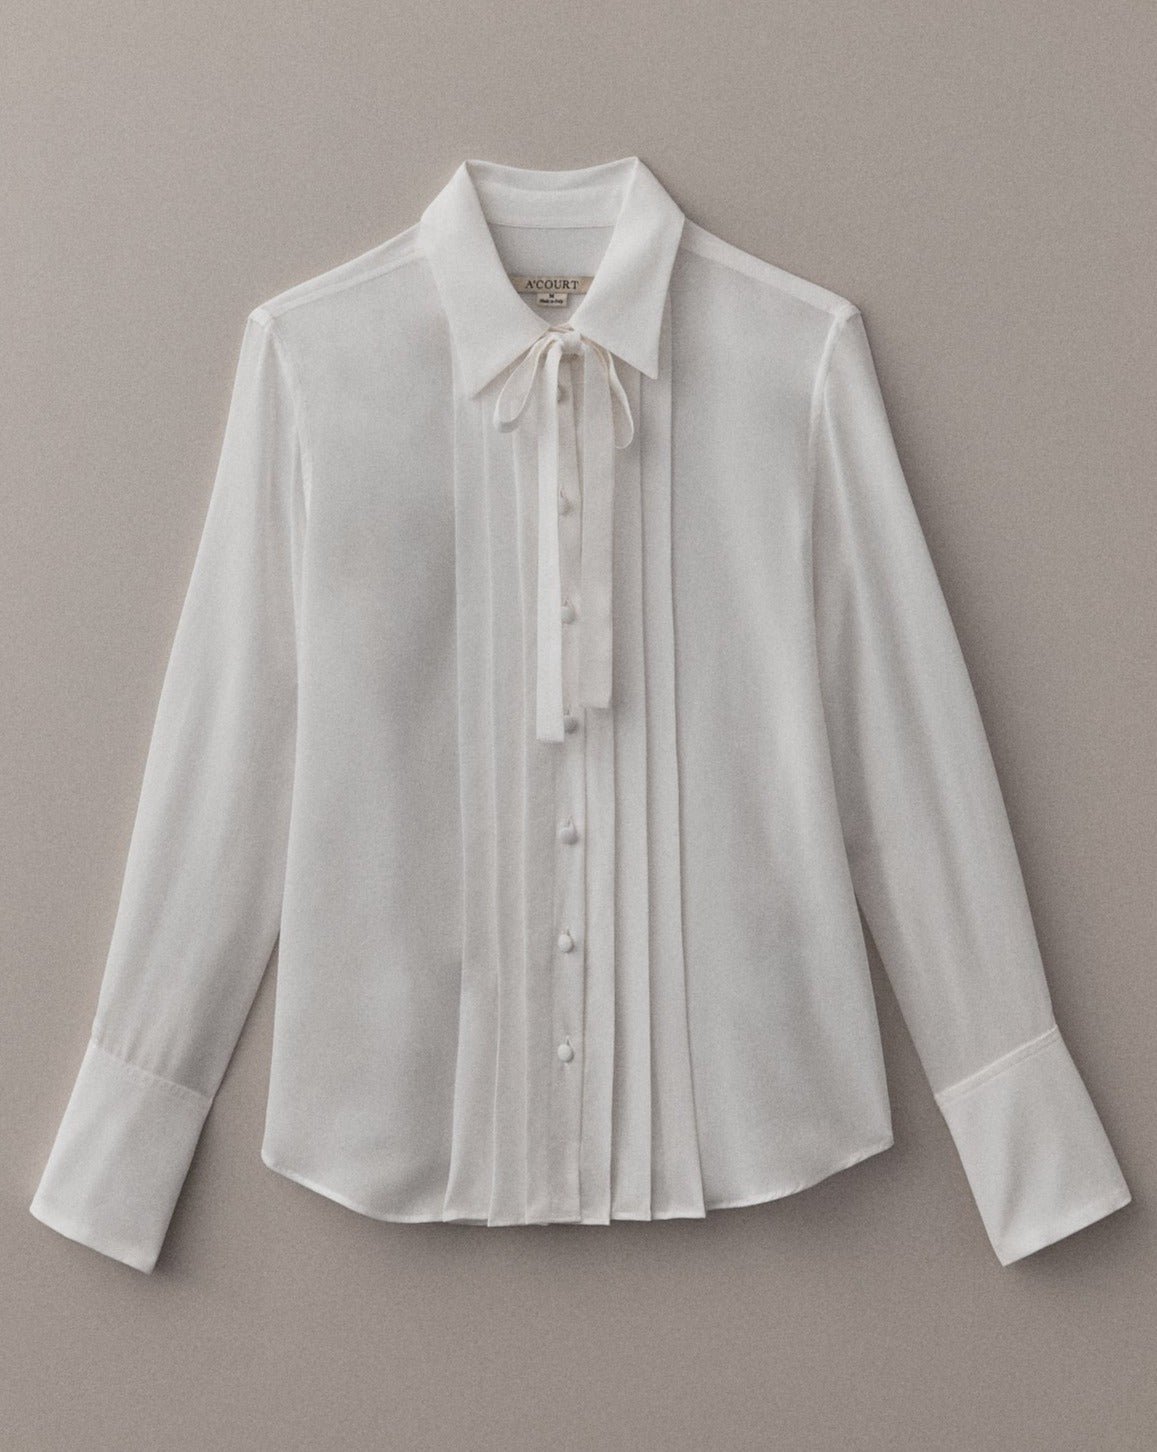 A long sleeve white button-down with pleats and a tie at the front collar lies flat on a light brown field.